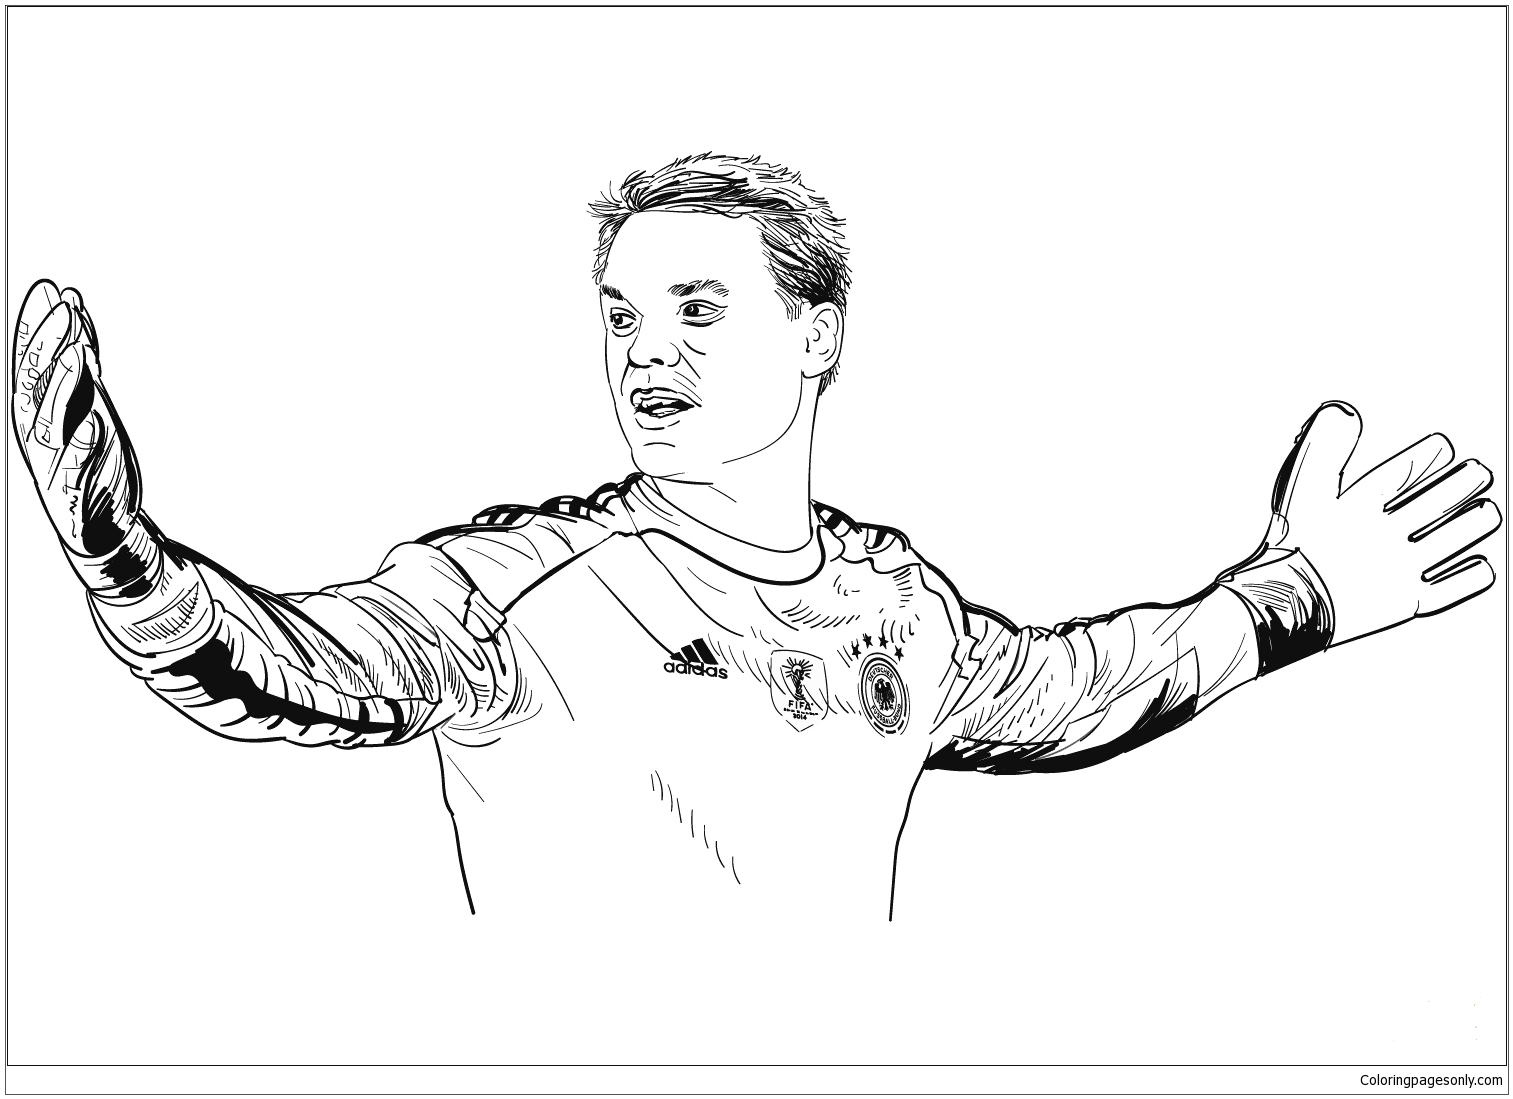 Manuel Neuer-image 1 Coloring Pages